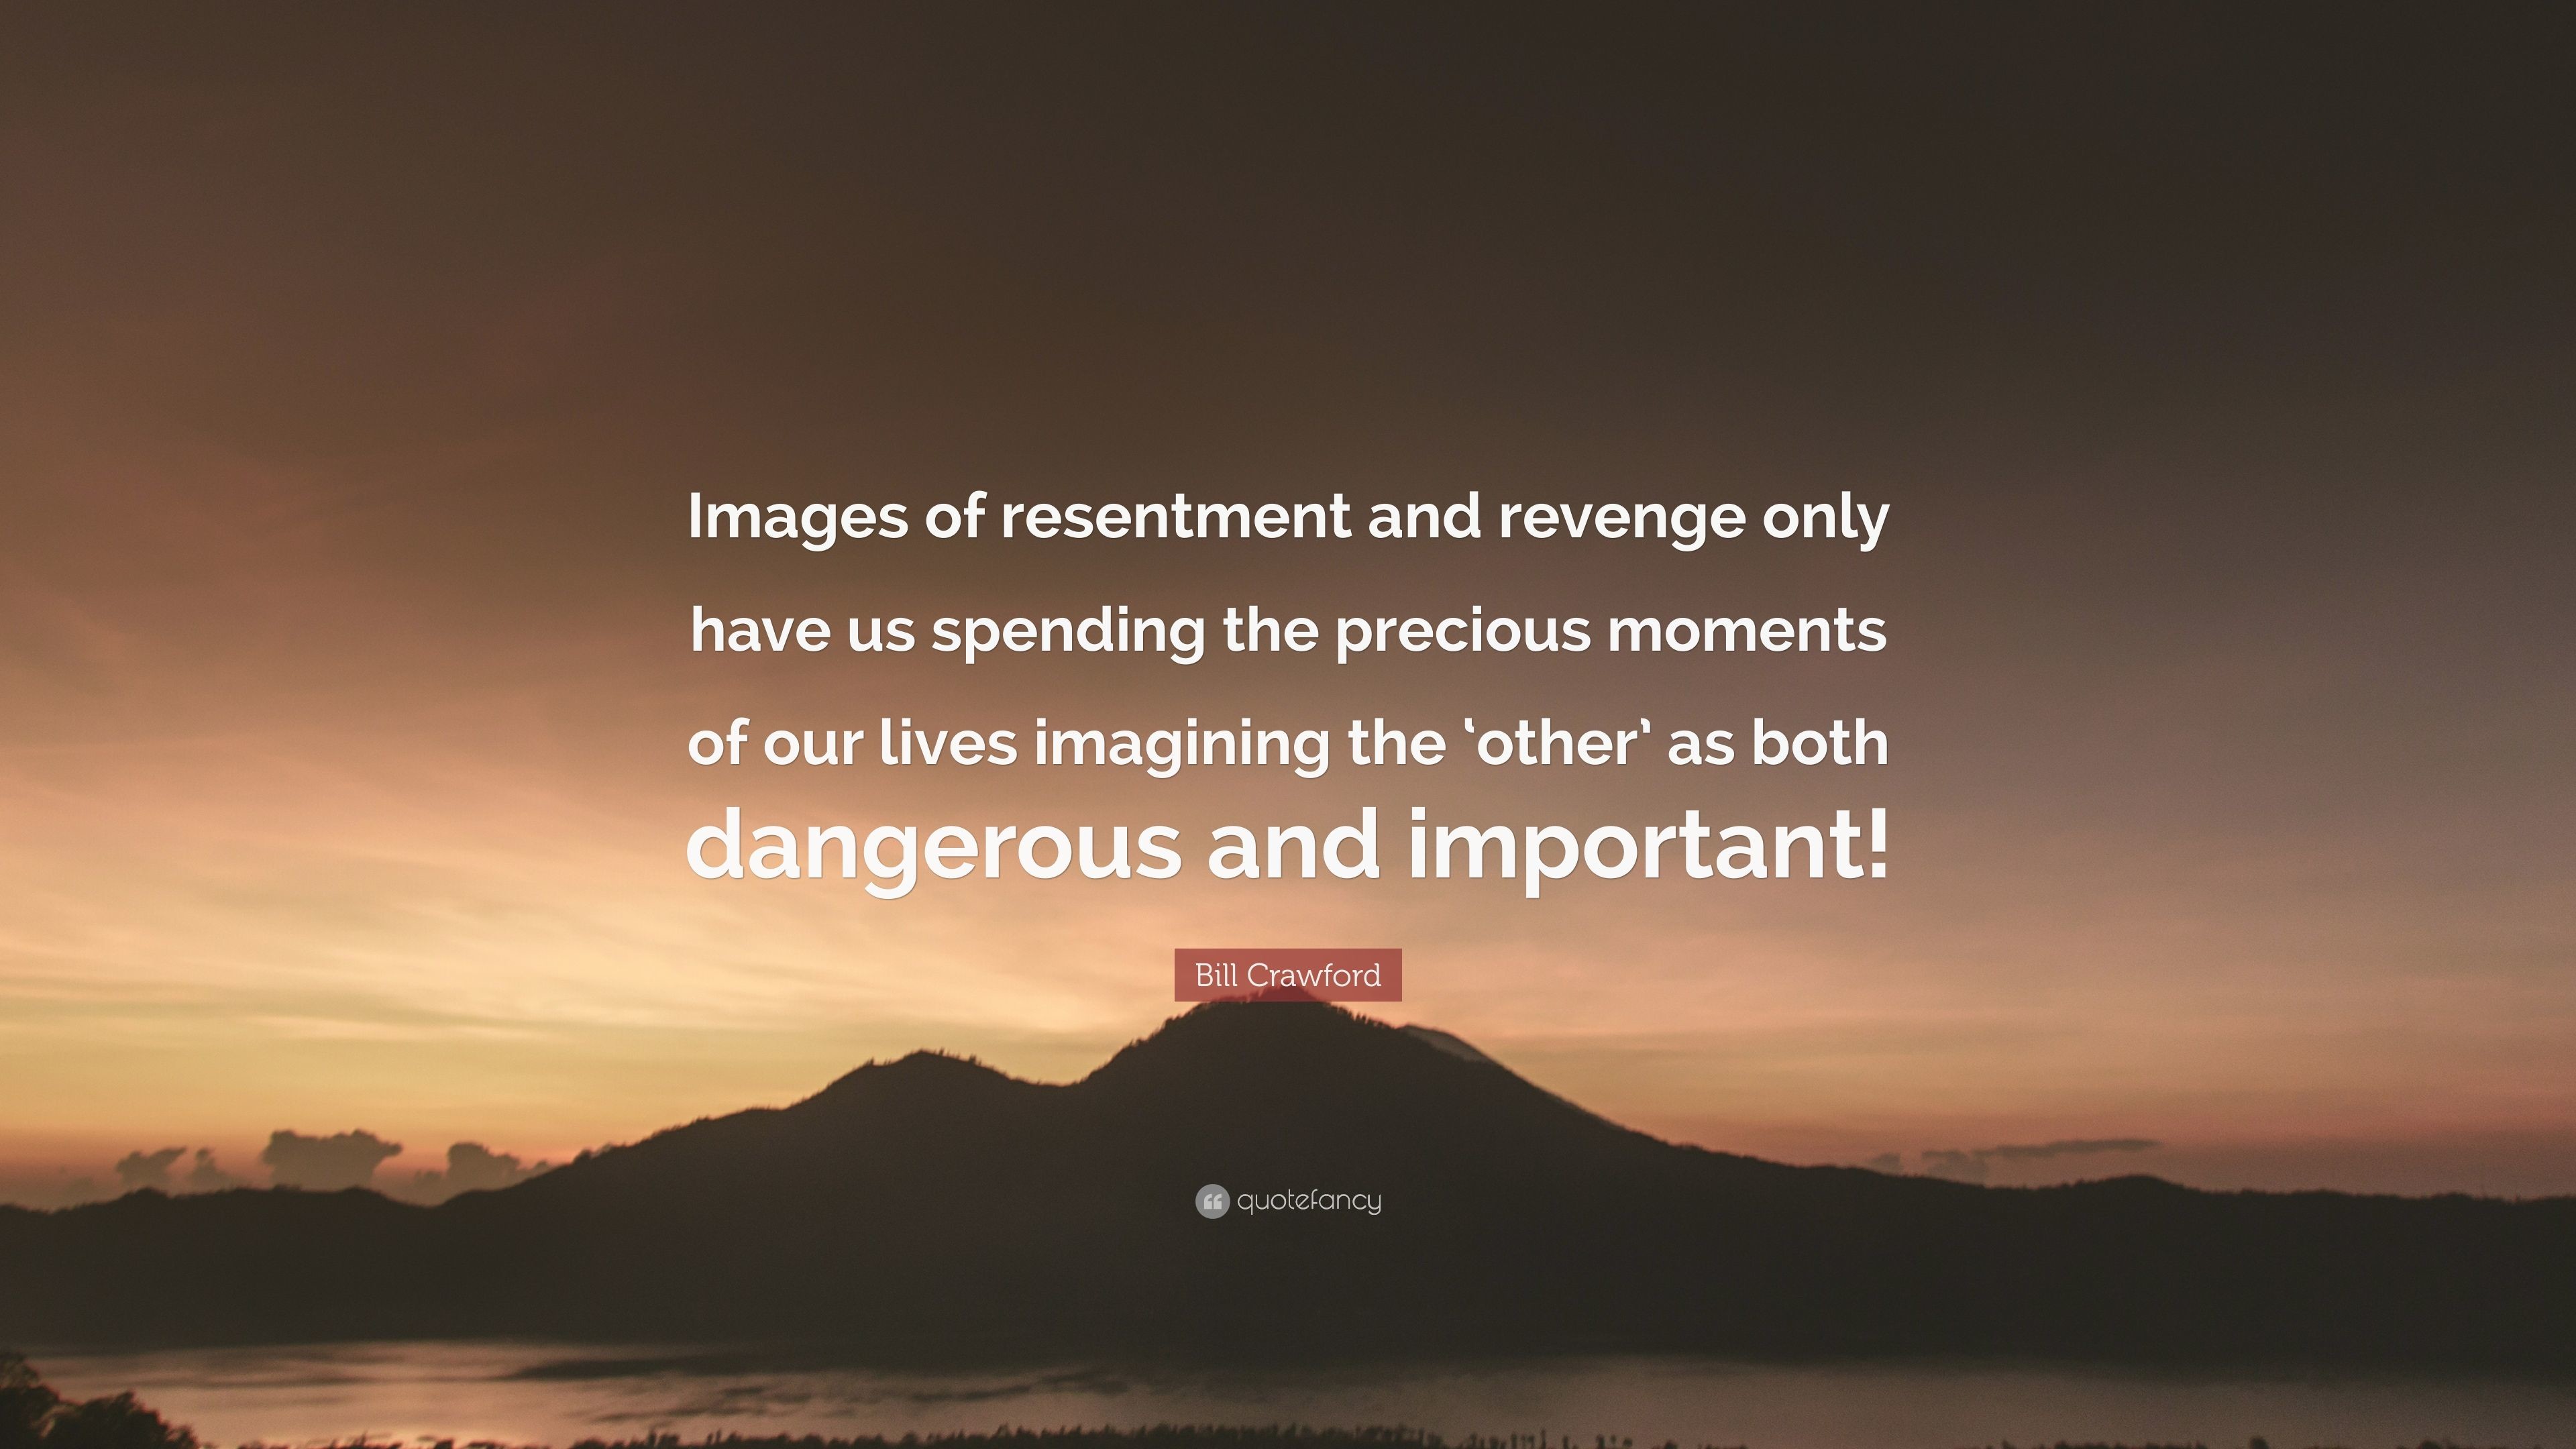 3840x2160 Bill Crawford Quote: “Images of resentment and revenge only have us  spending the precious